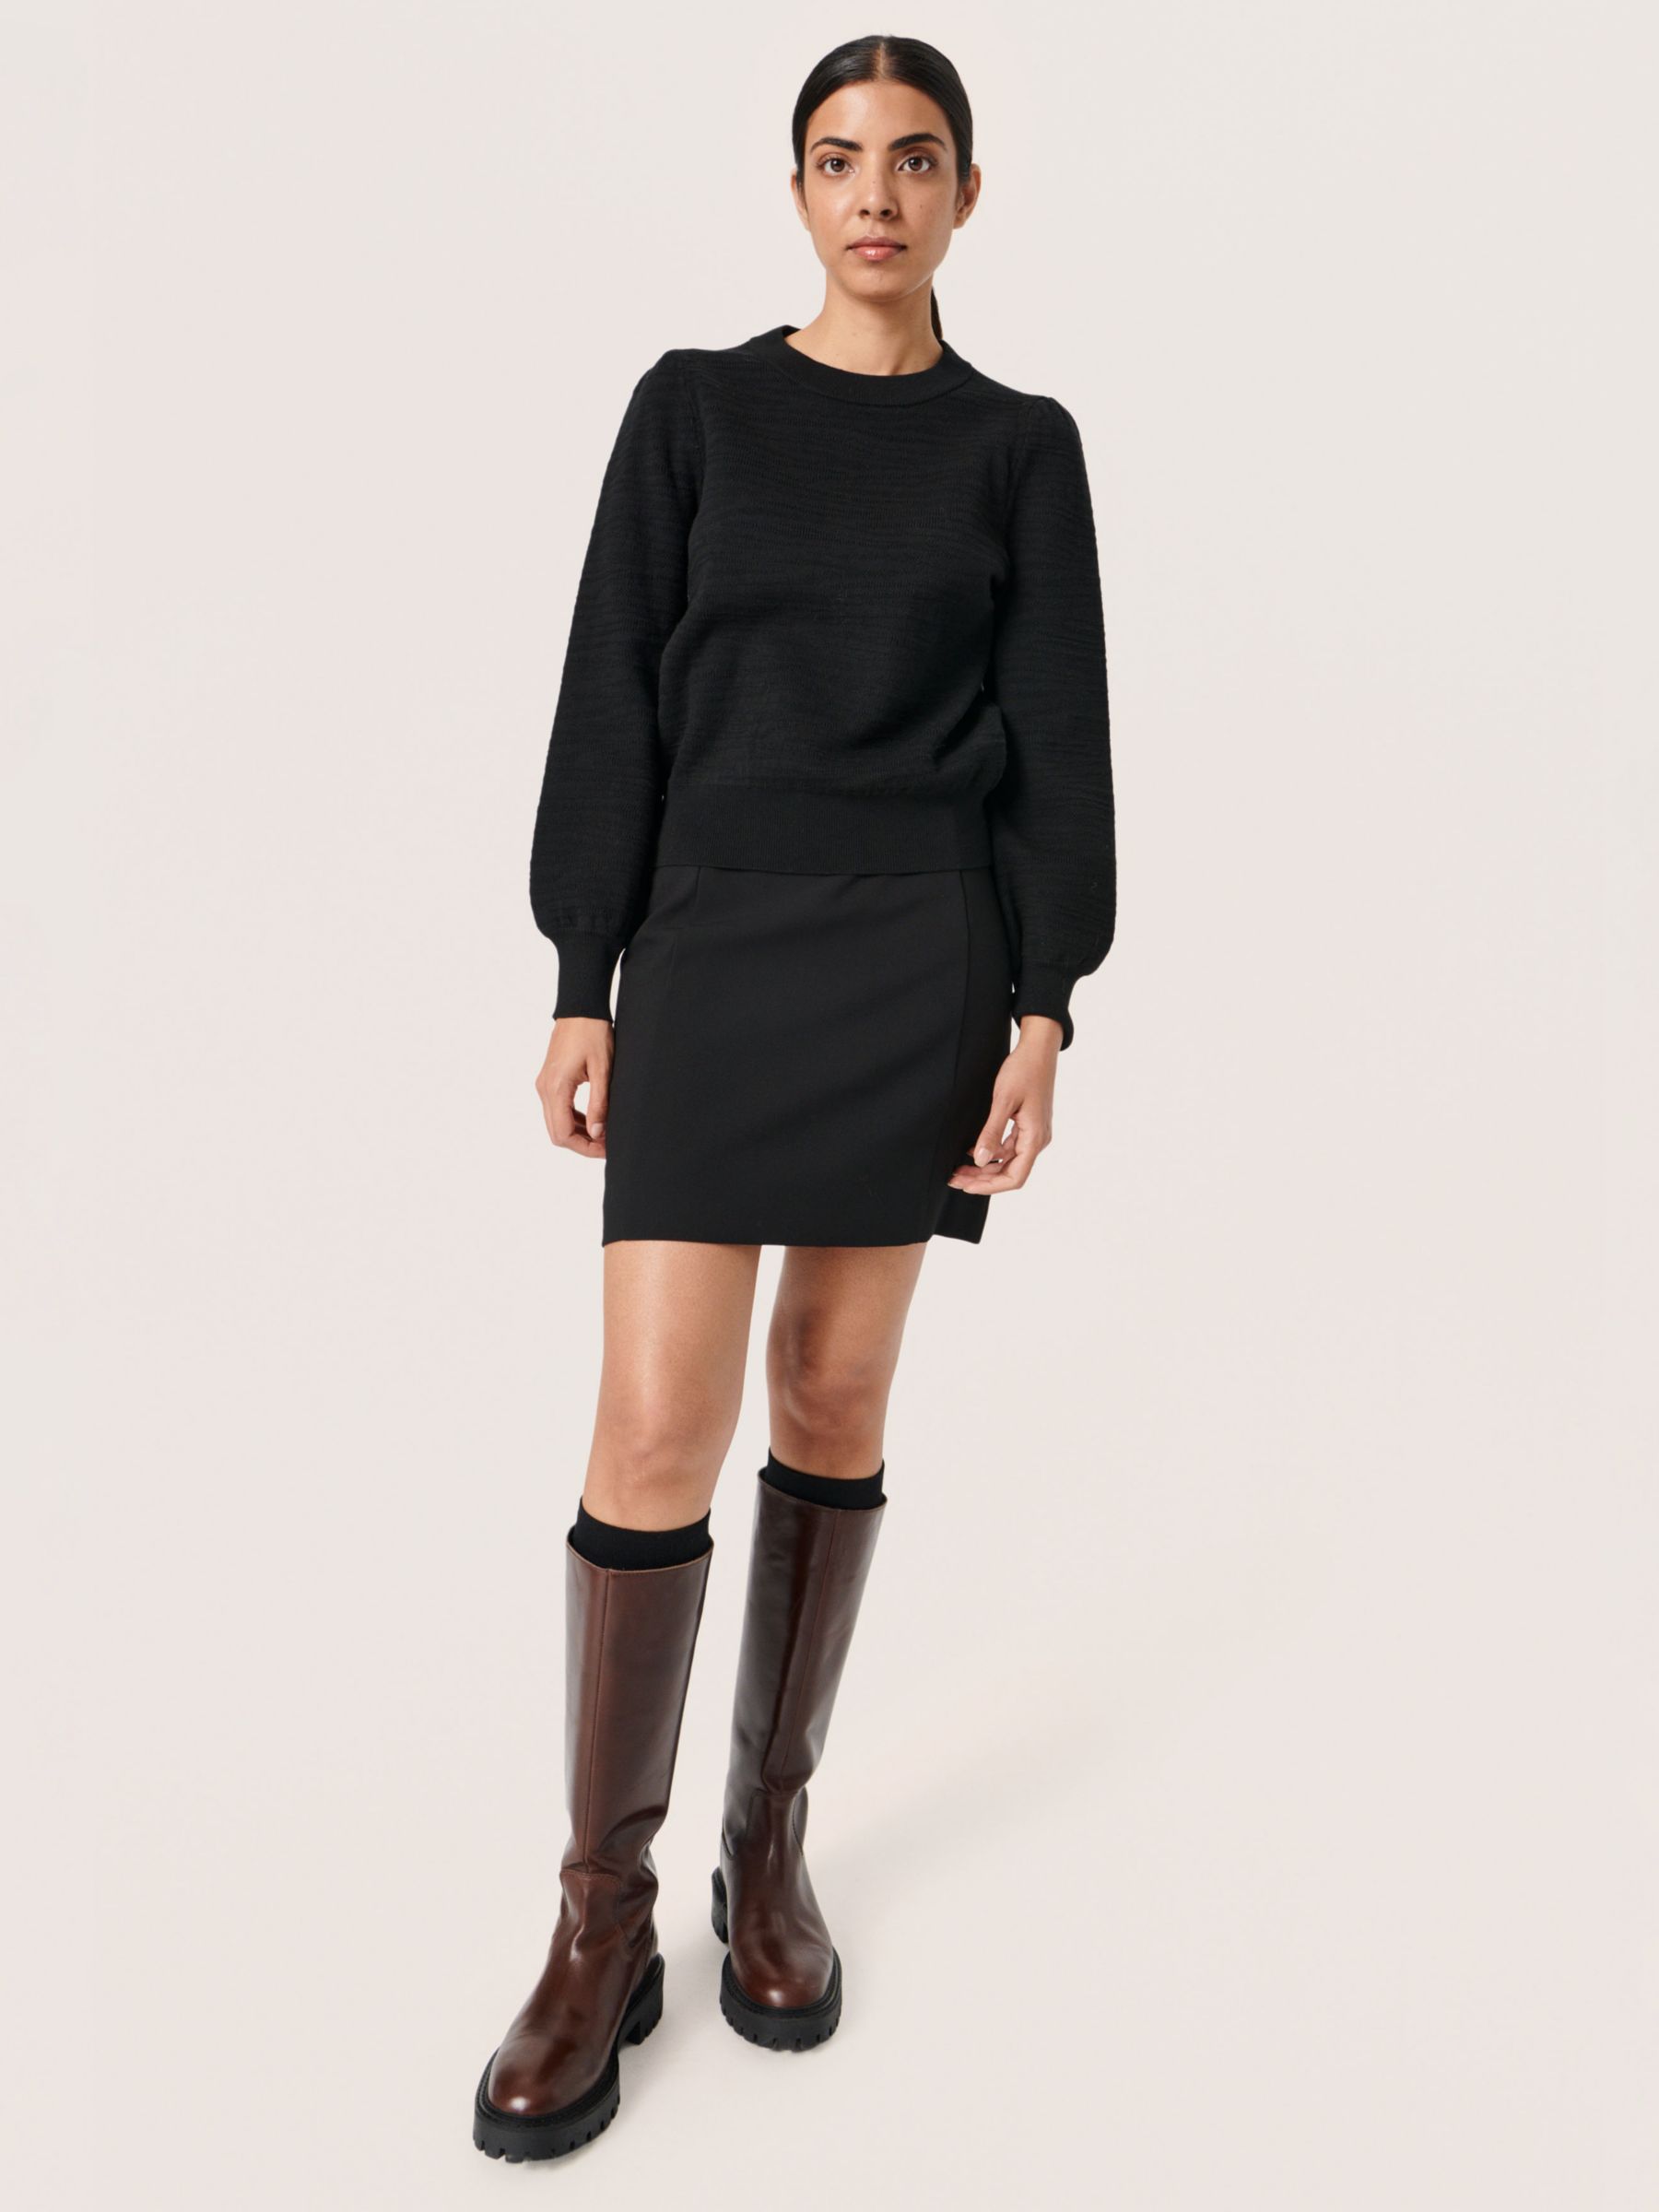 Soaked In Luxury Pipa Cotton Blend Jumper, Black at John Lewis & Partners